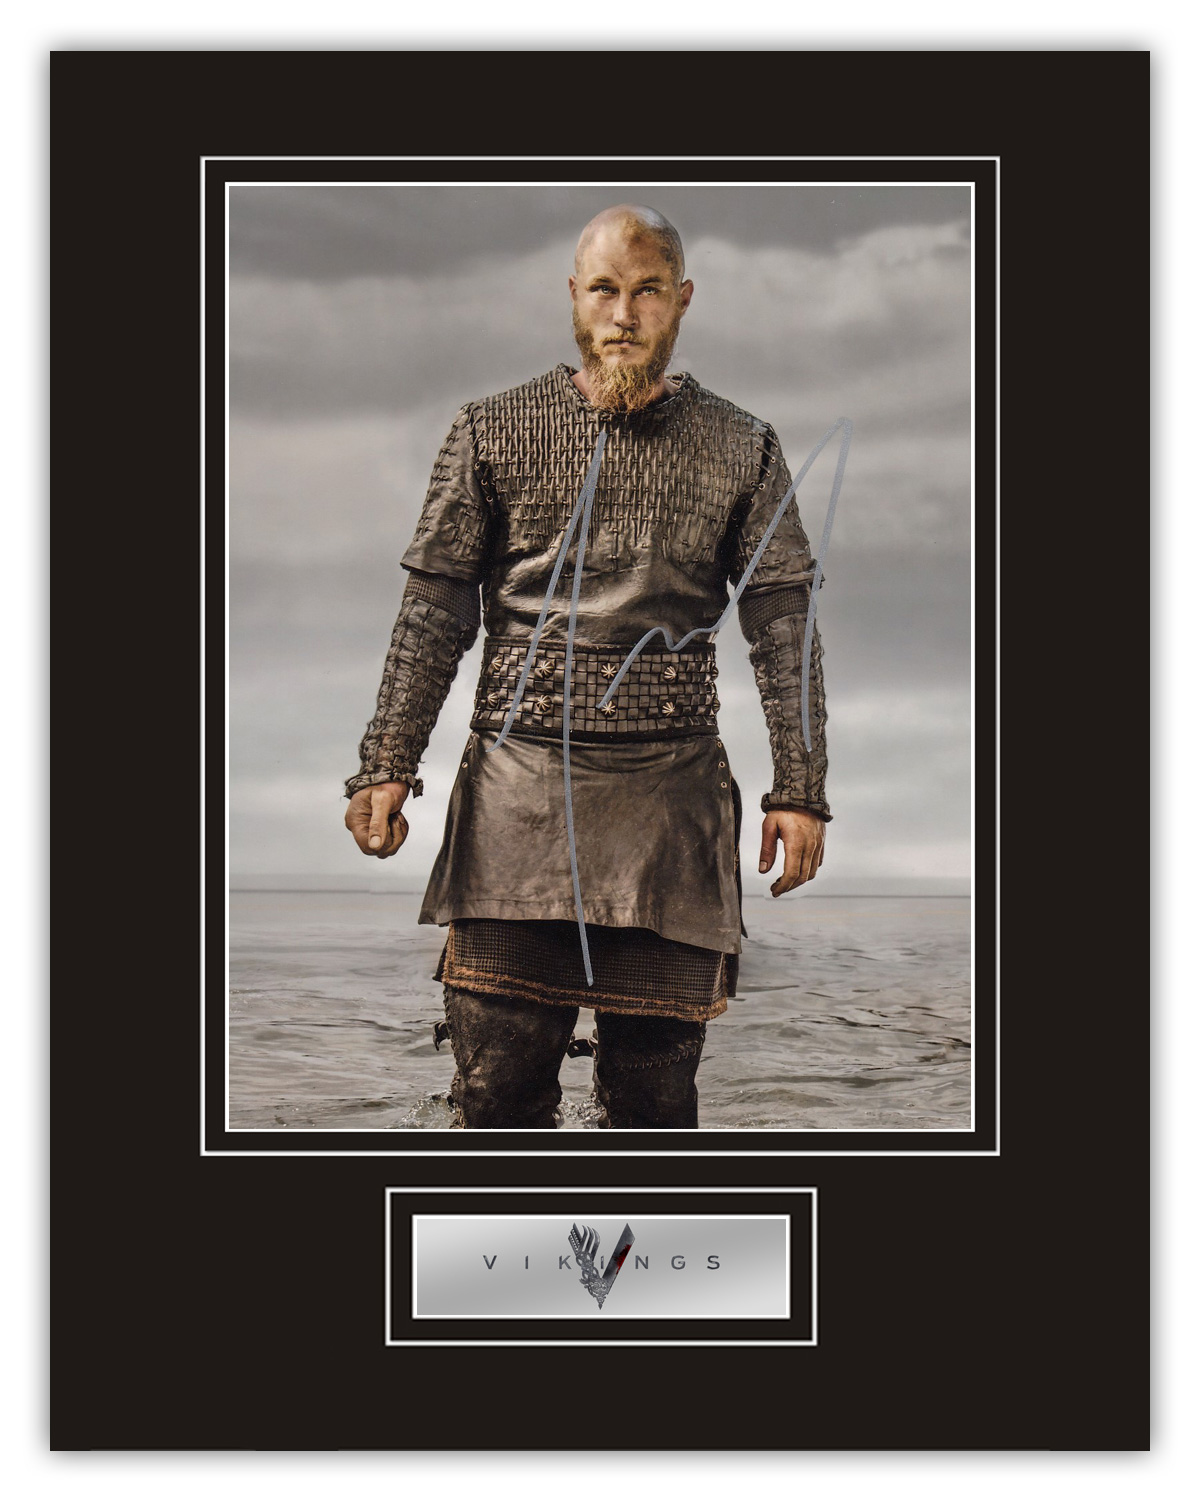 Stunning Display! Vikings Travis Fimmel hand signed professionally mounted display. This beautiful